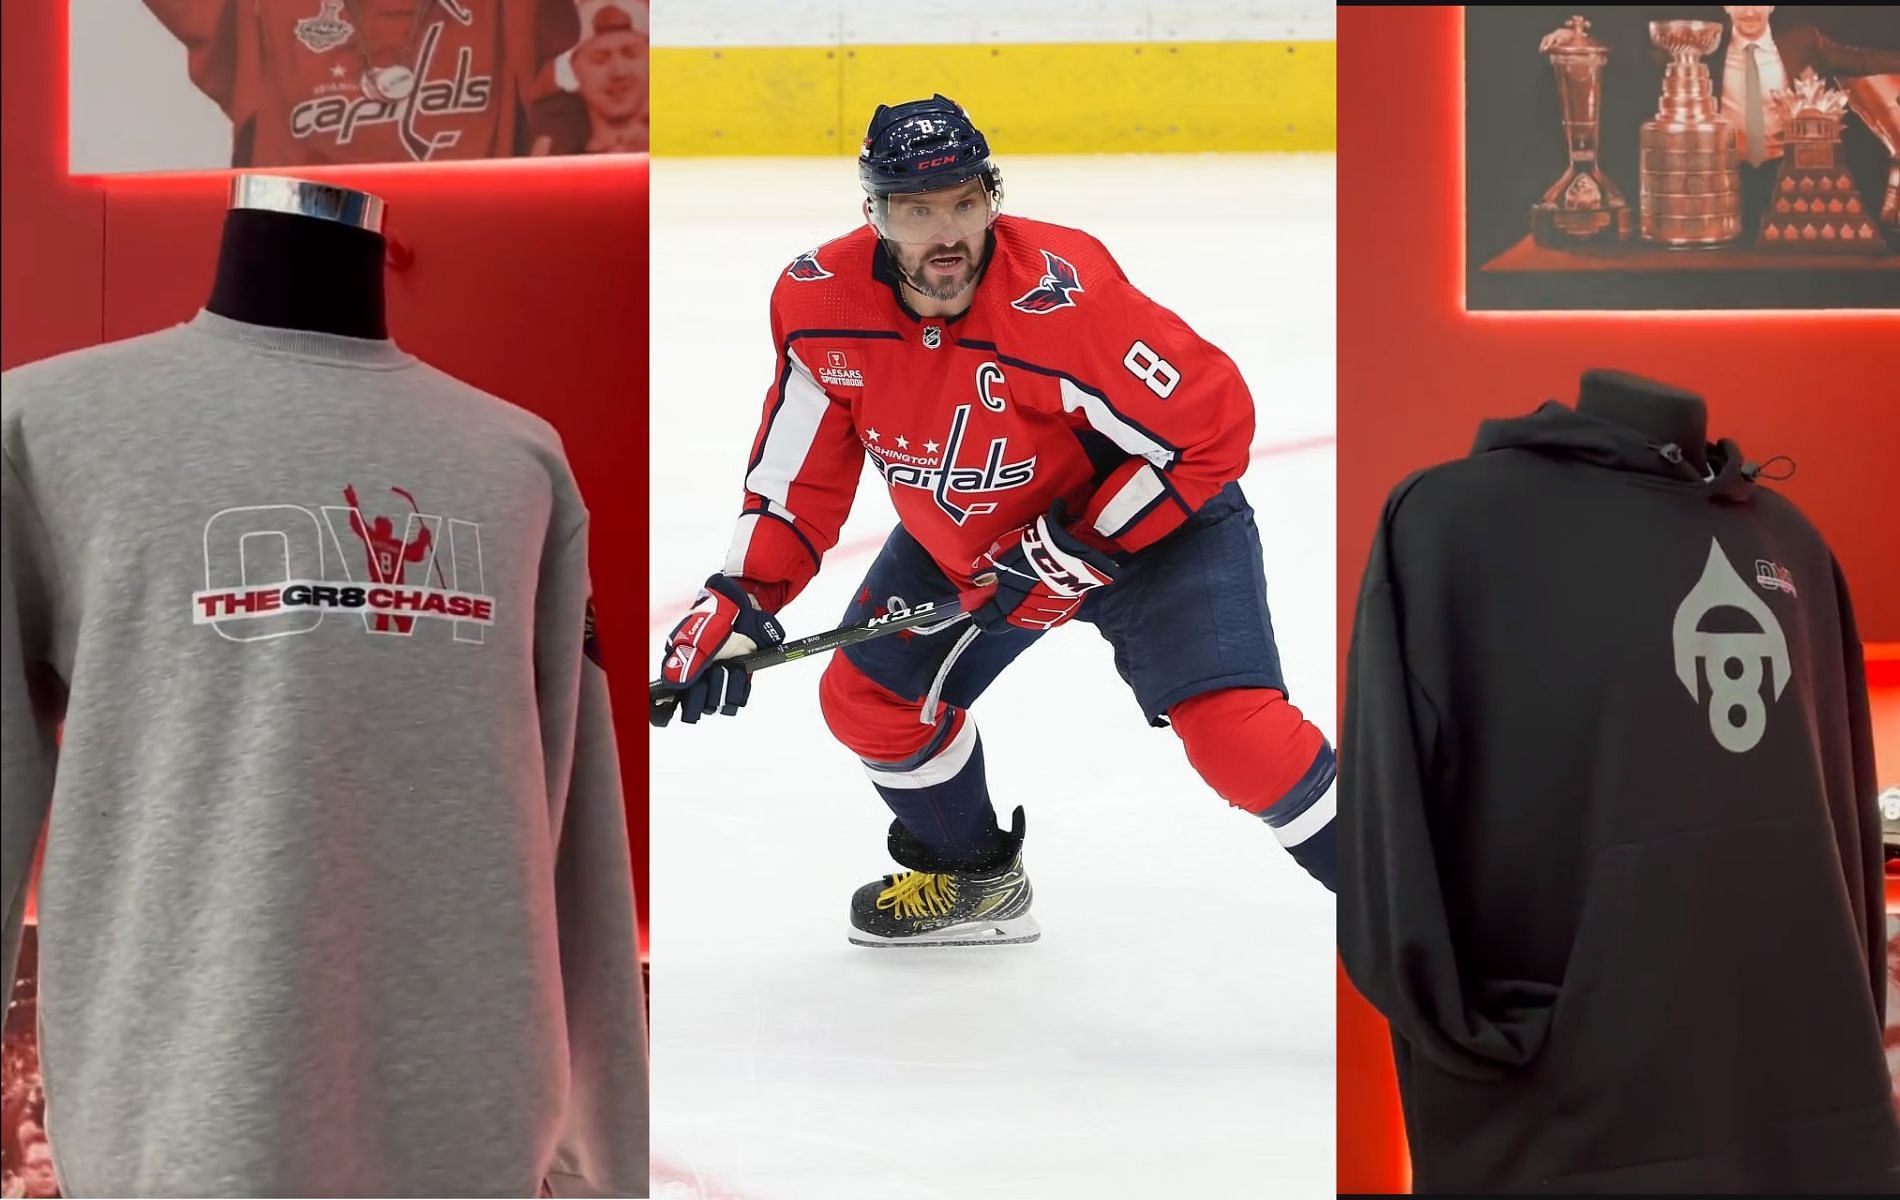 Alex Ovechkin releases new clothing line called OVIGR8, plans to extend  brand globally